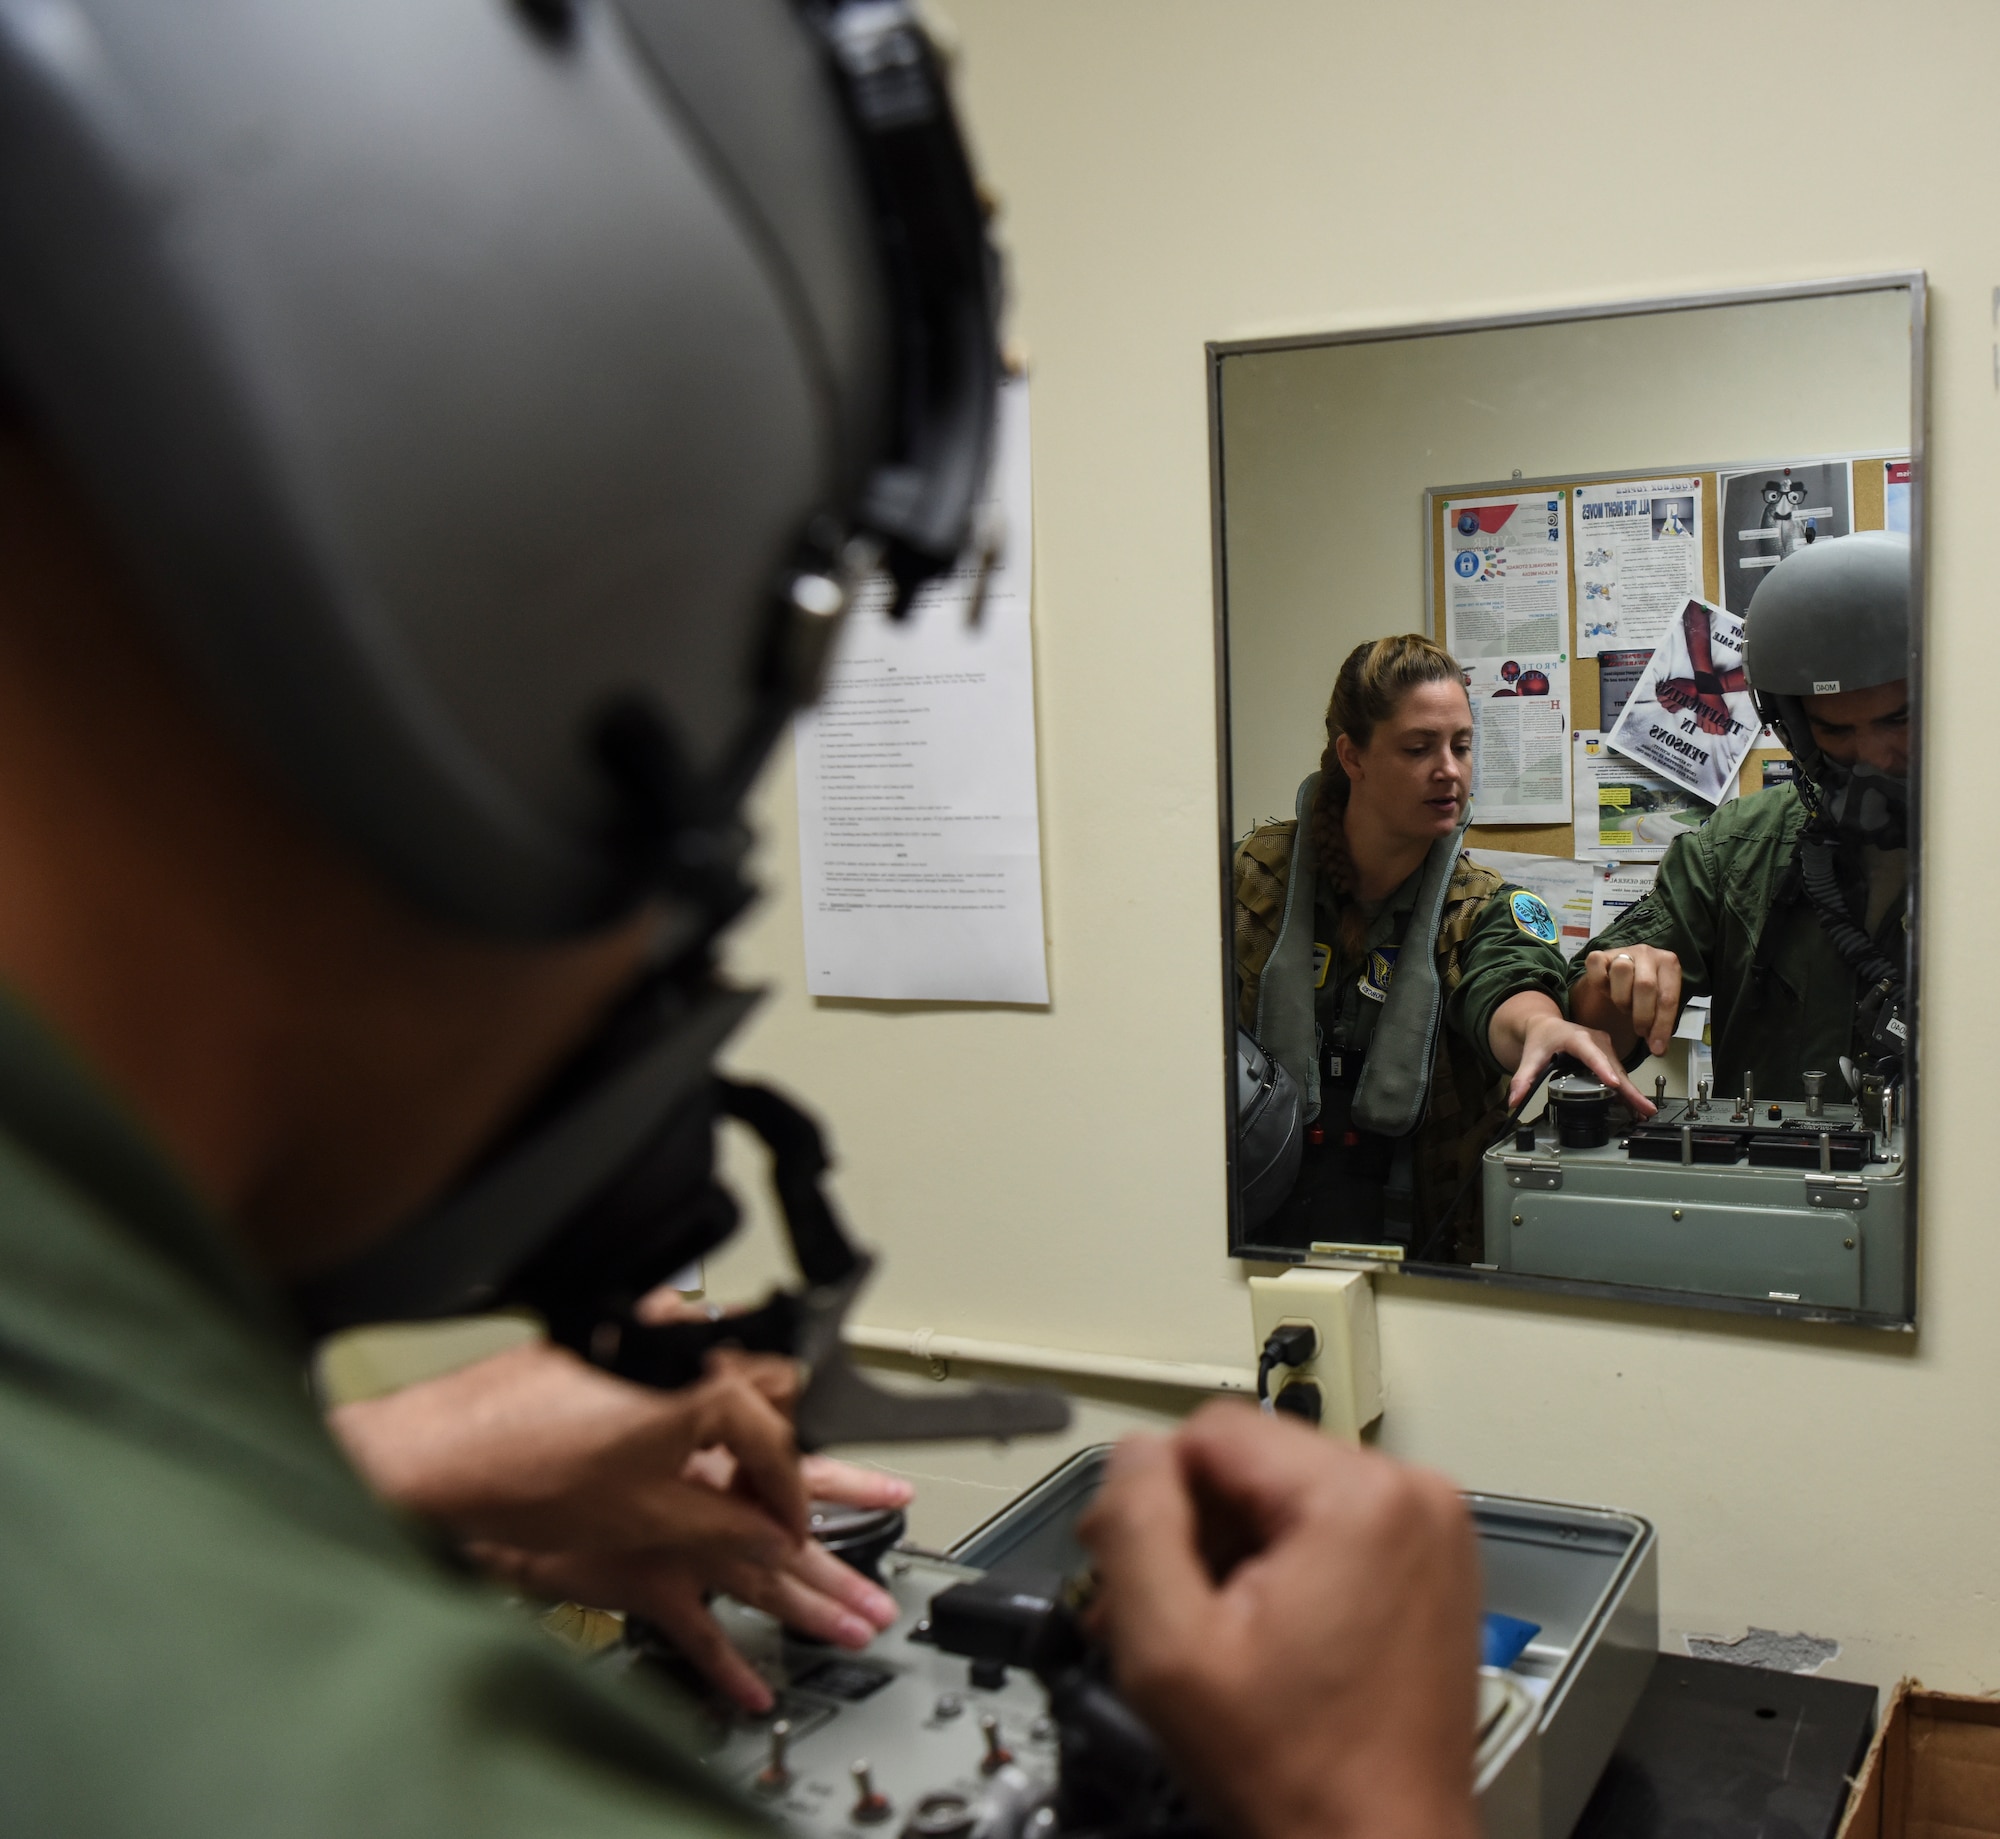 Capt. Rachel Long (left), 69th Expeditionary Bomb Squadron radar navigation officer, and Capt. Jon Guile, 69th EBS B-52 Stratofortress aircraft commander, check their helmets on an Oxygen Mask Test Unit on Andersen Air Force, Guam, Oct. 22, 2019. The 69th EBS aircrew members support the Indo-Pacific region by fulfilling the Continuous Bomber Presence mission housed on Andersen. The CBP provides rapid global strike capabilities, assurance to our allies in deterrence to possible adversaries, and maintains security and stability in the Indo-Pacific region. (U.S. Air Force photo by Airman 1st Class Michael S. Murphy)